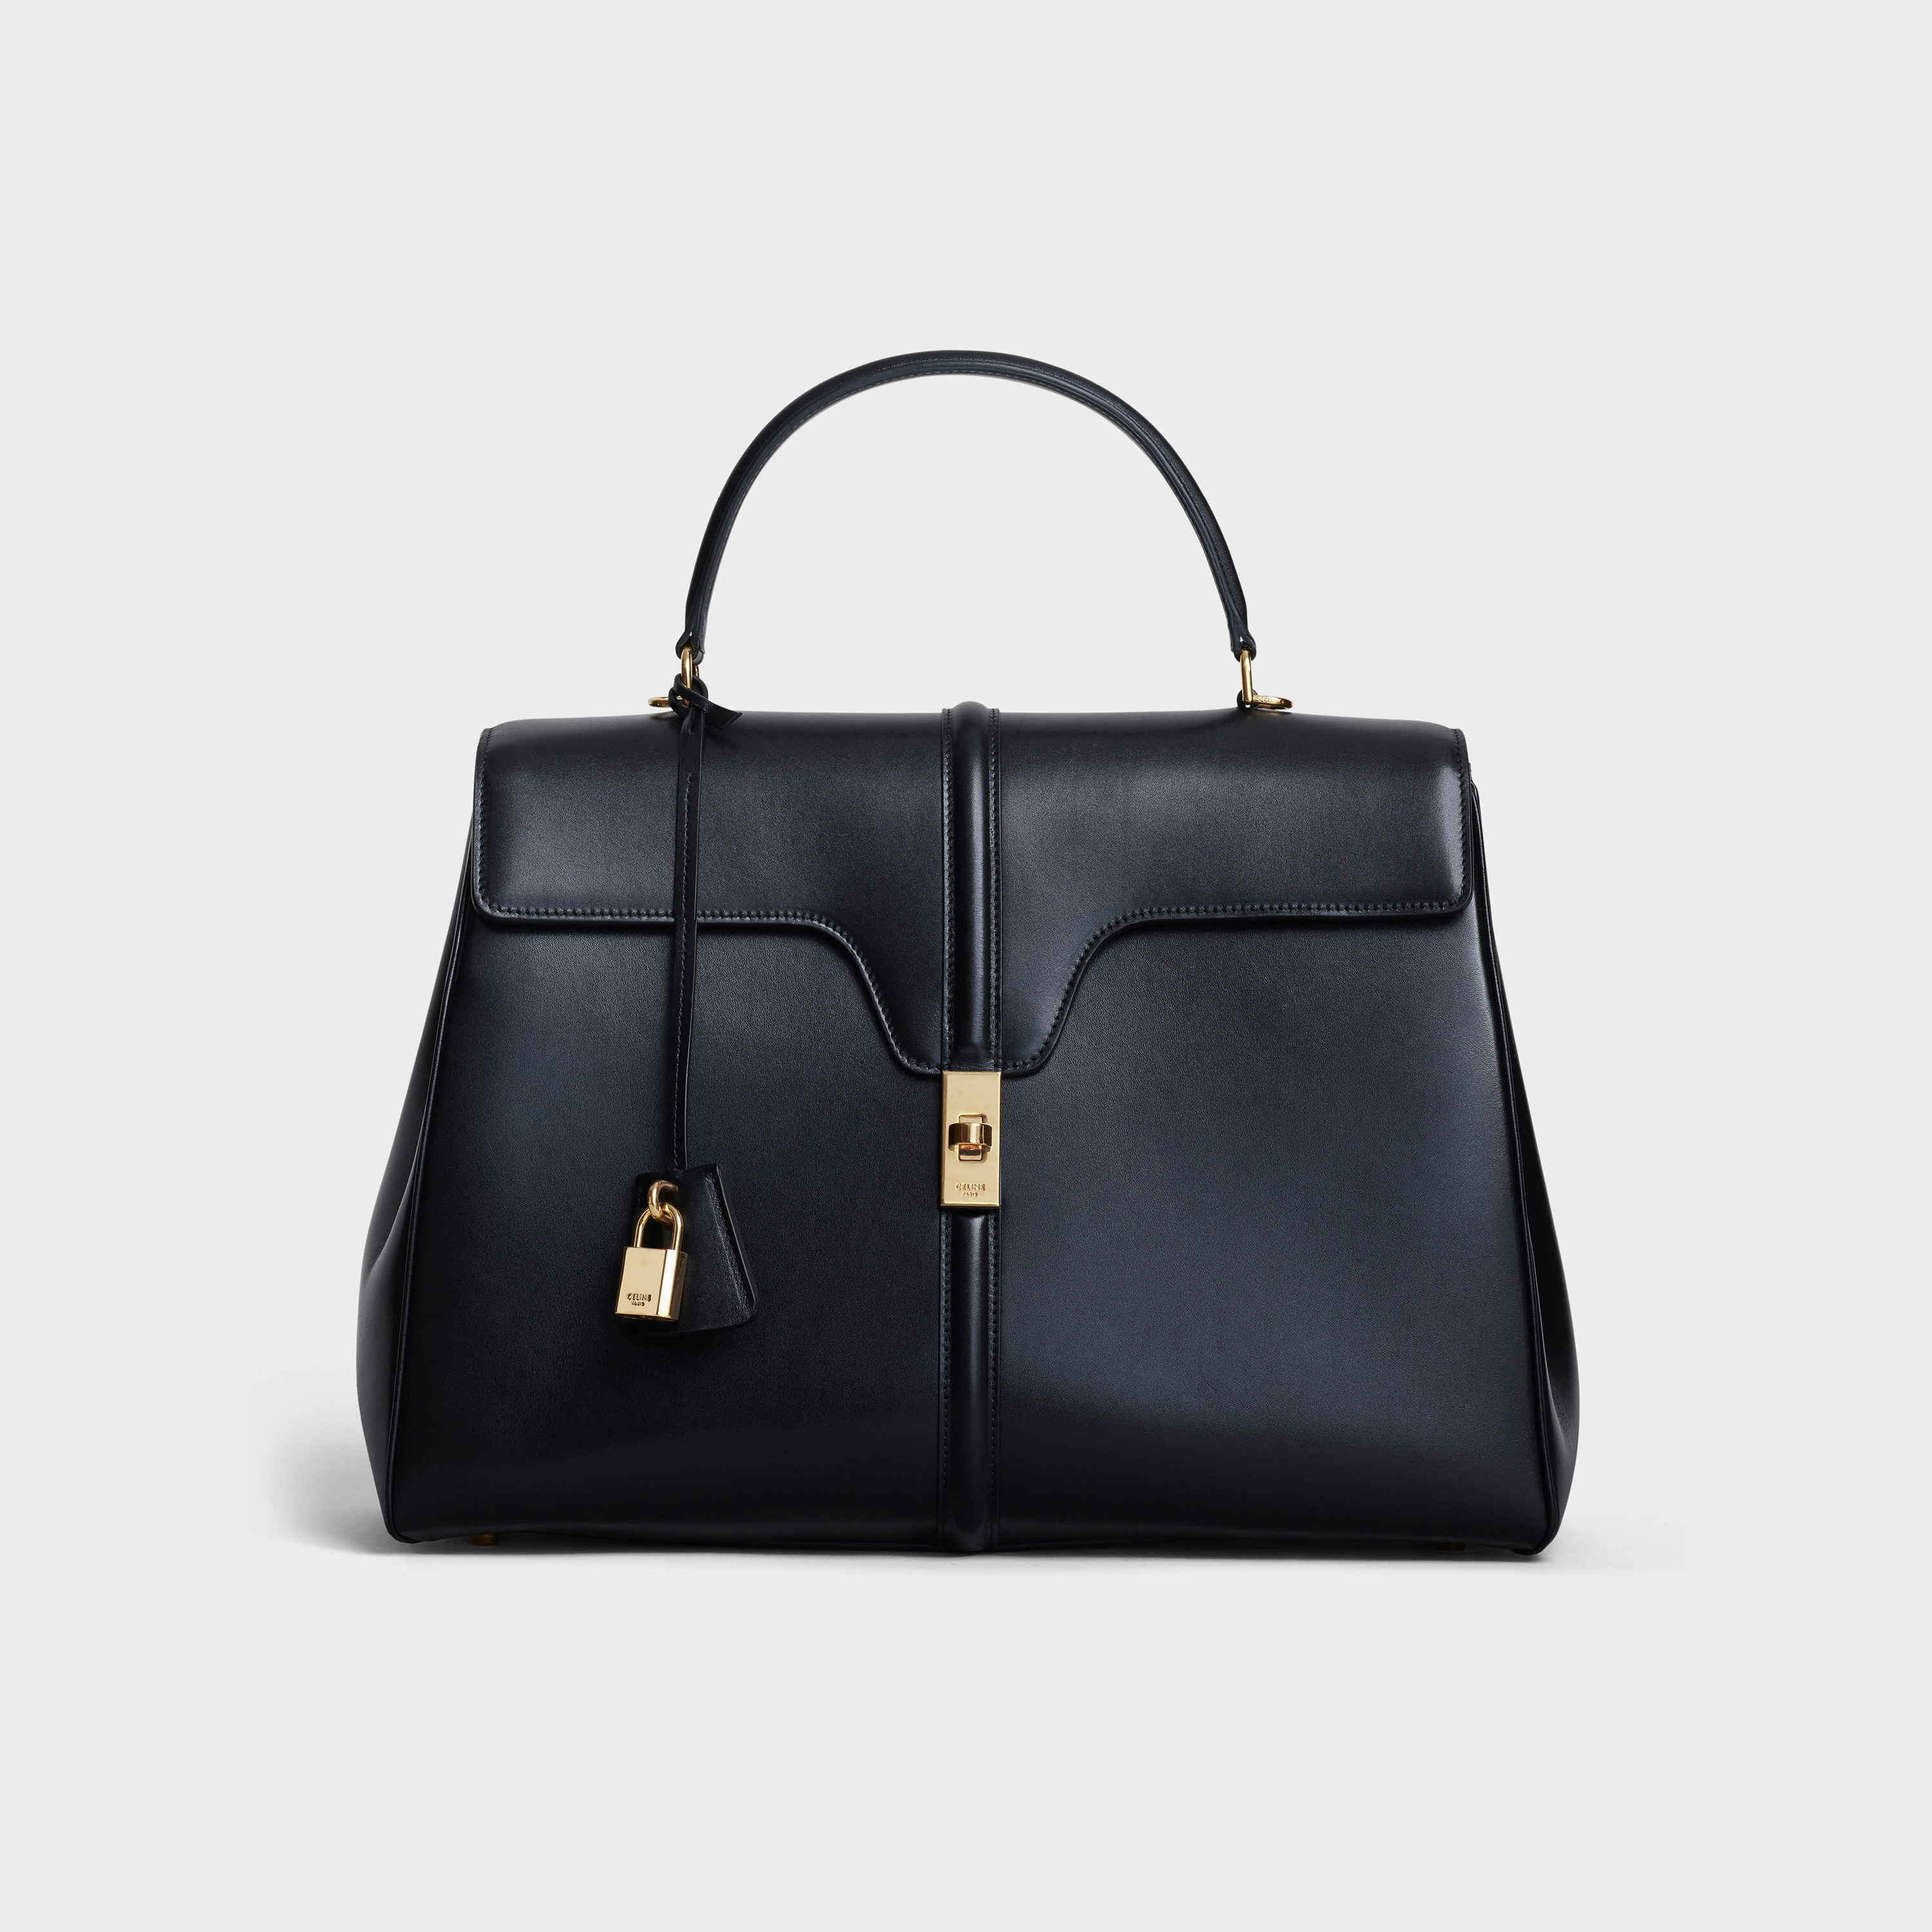 Top 8 Old Money Luxury Bags - luxfy